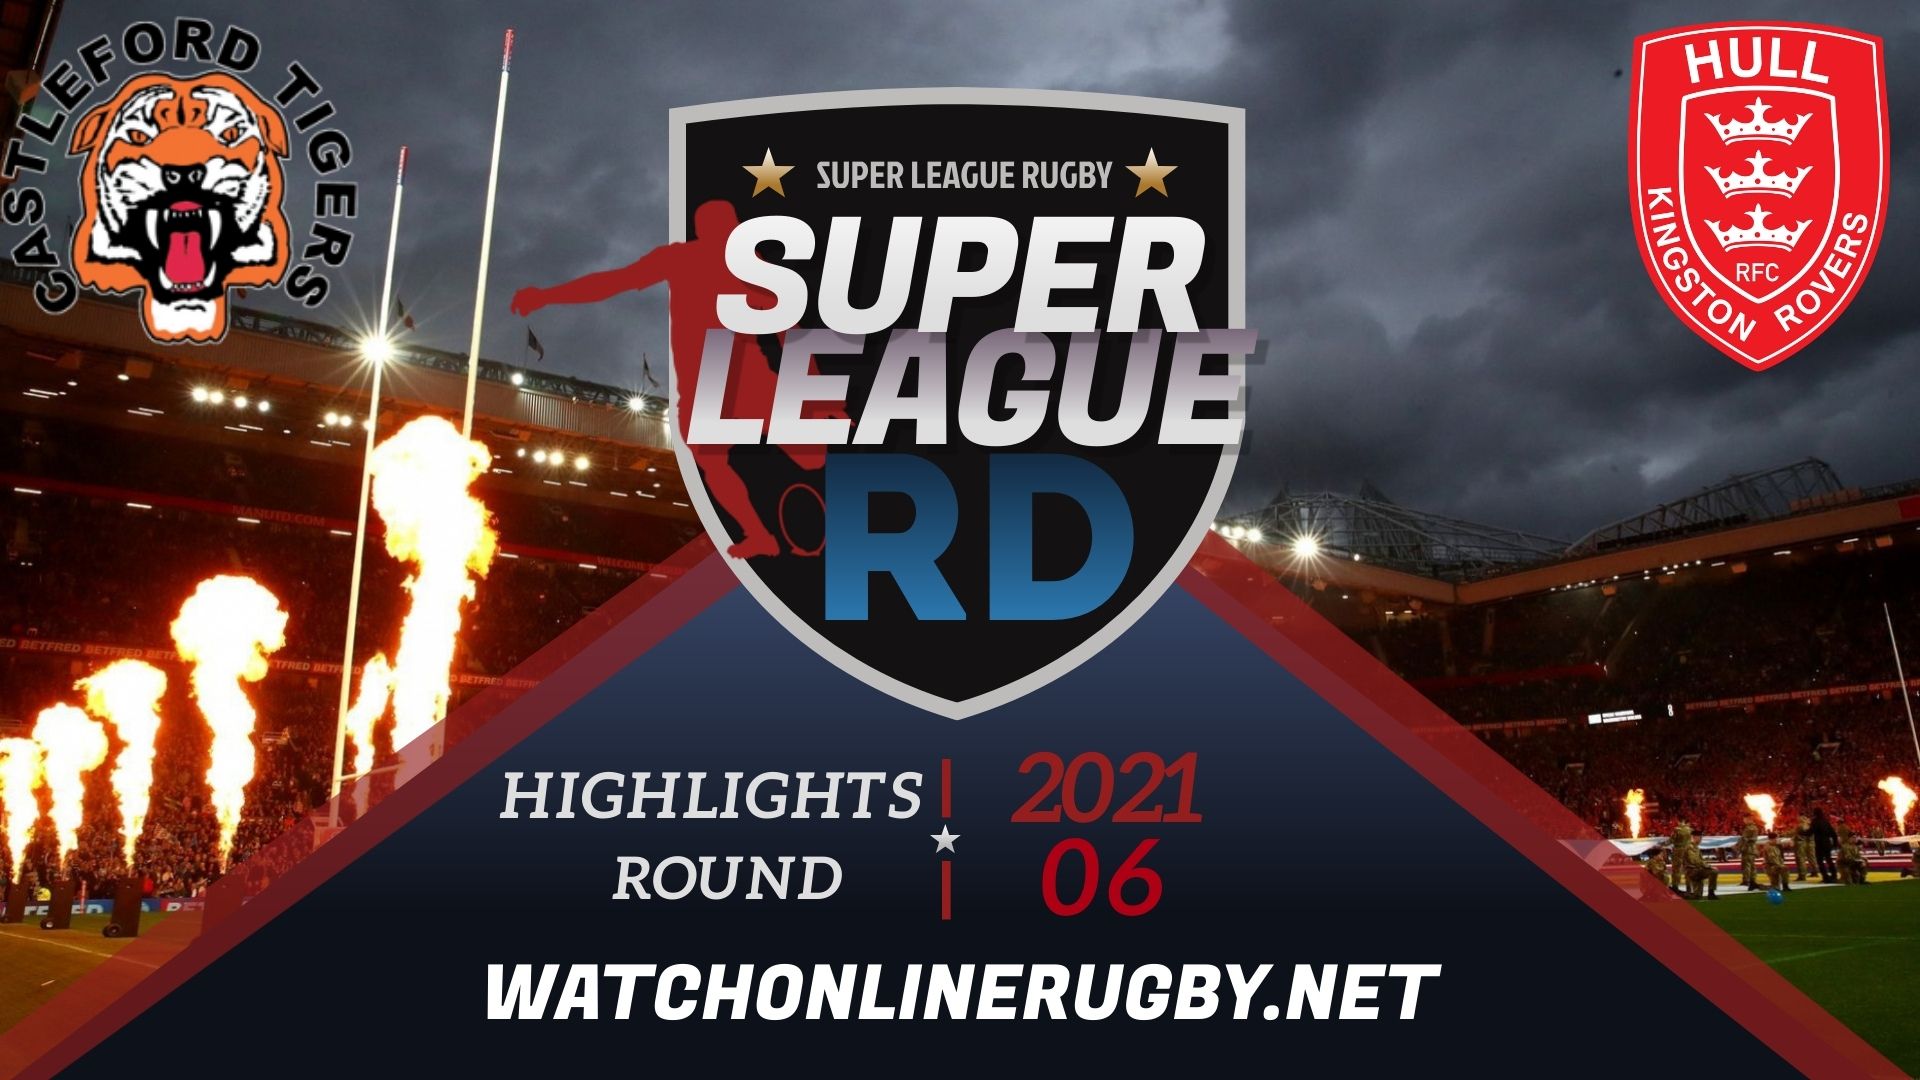 Castleford Tigers Vs Hull Kingston Rovers Super League Rugby 2021 RD 6